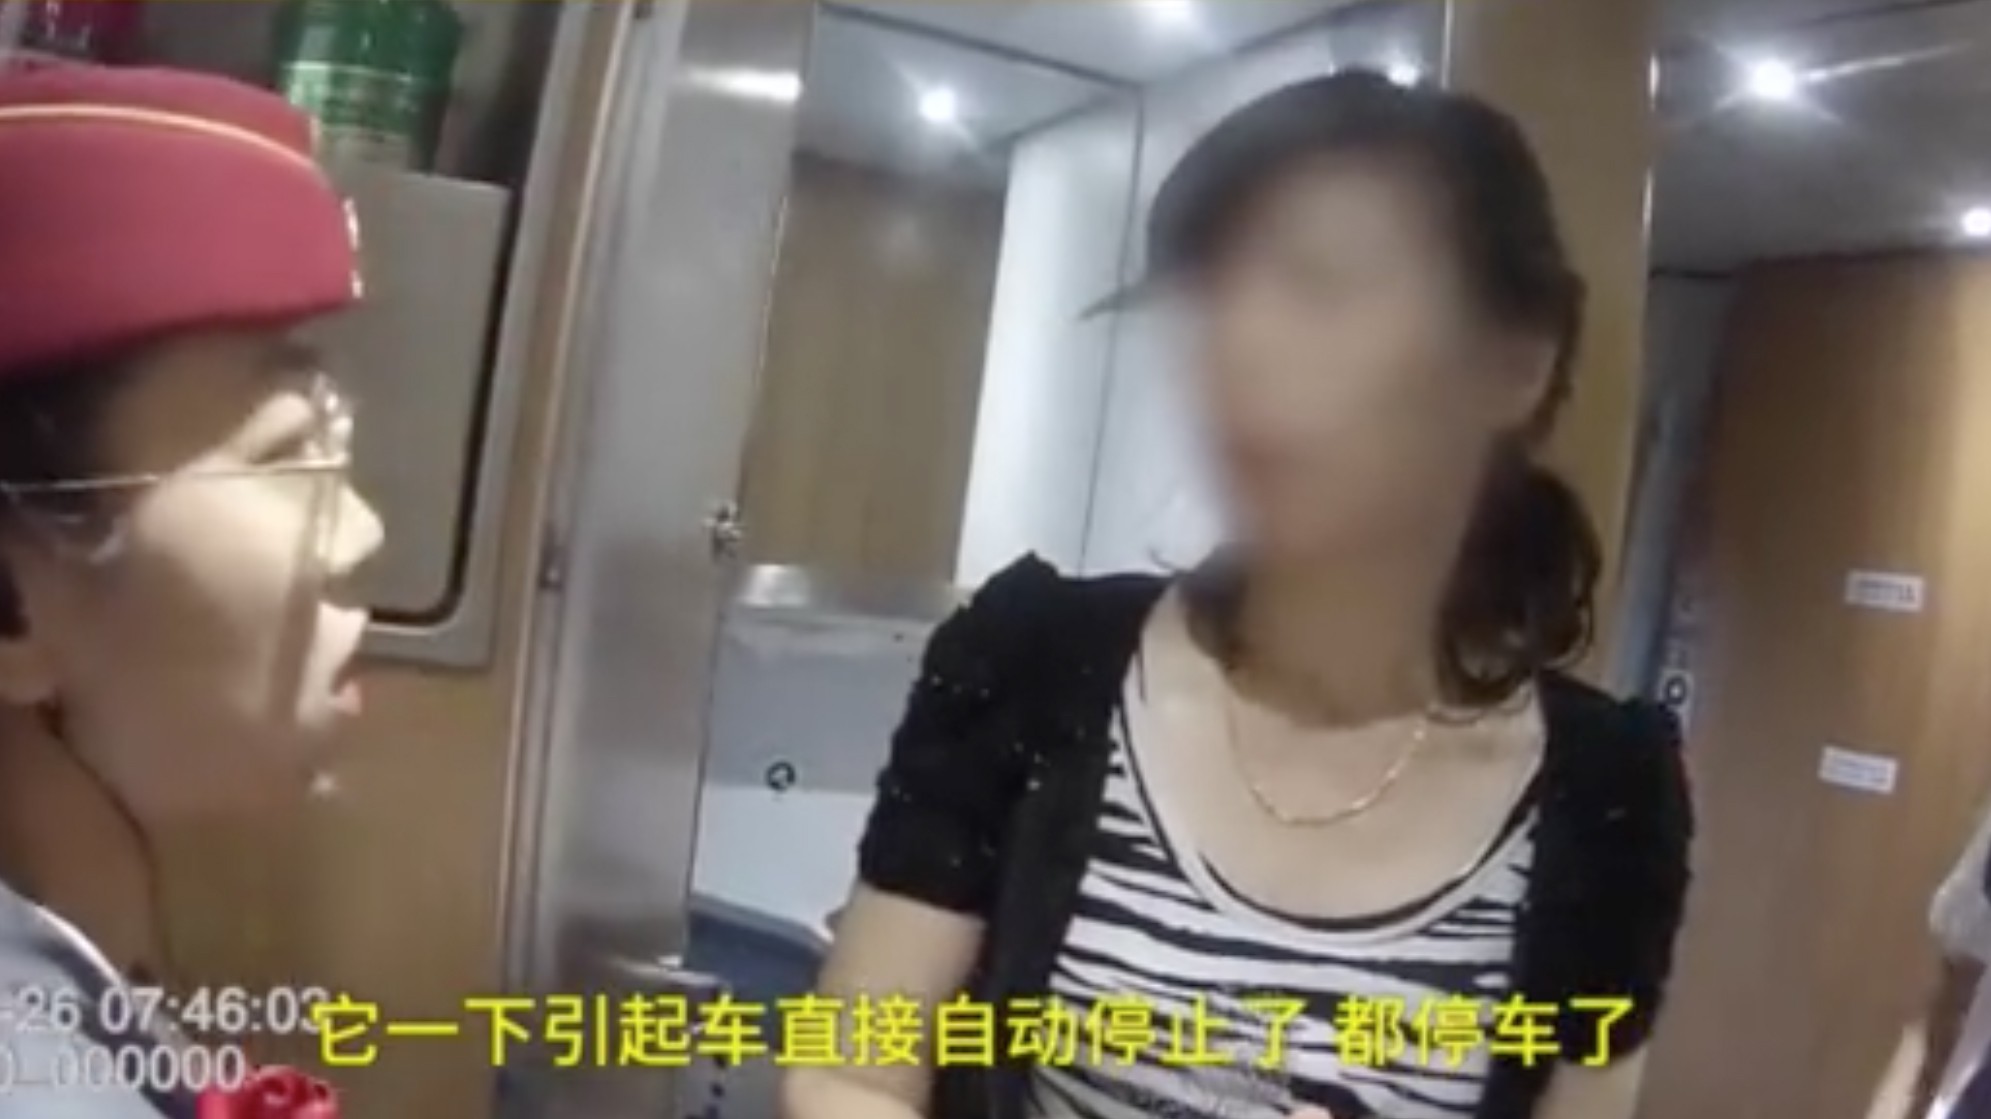 The unnamed woman had been spraying on sunblock in a lavatory when it triggered the fire alarm. Photo: miaopai.com